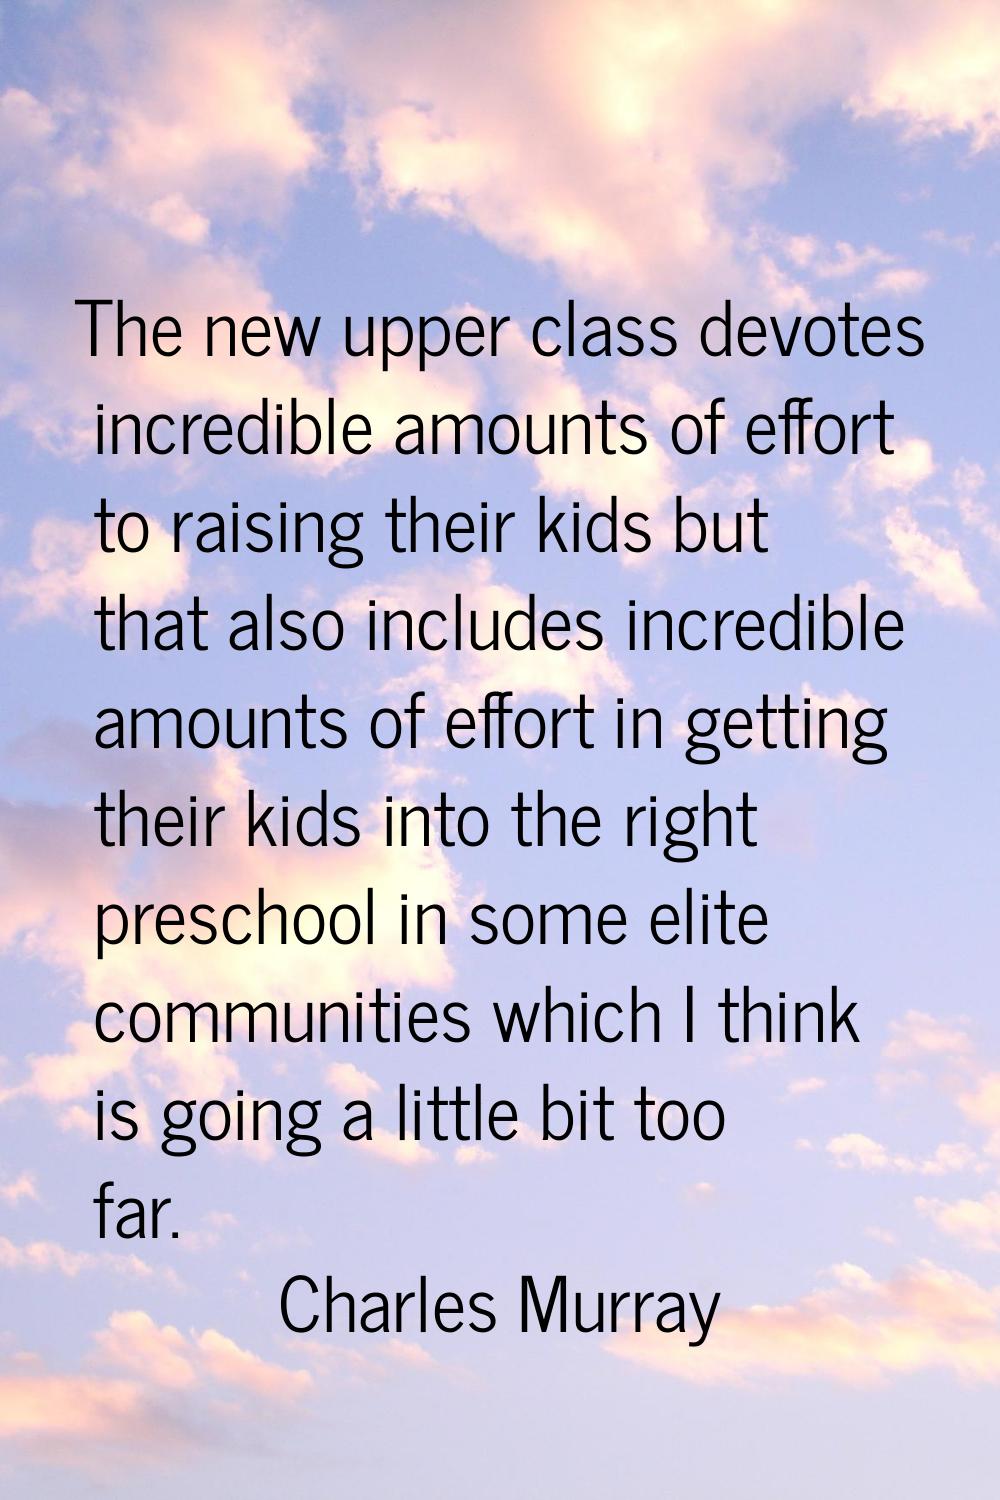 The new upper class devotes incredible amounts of effort to raising their kids but that also includ